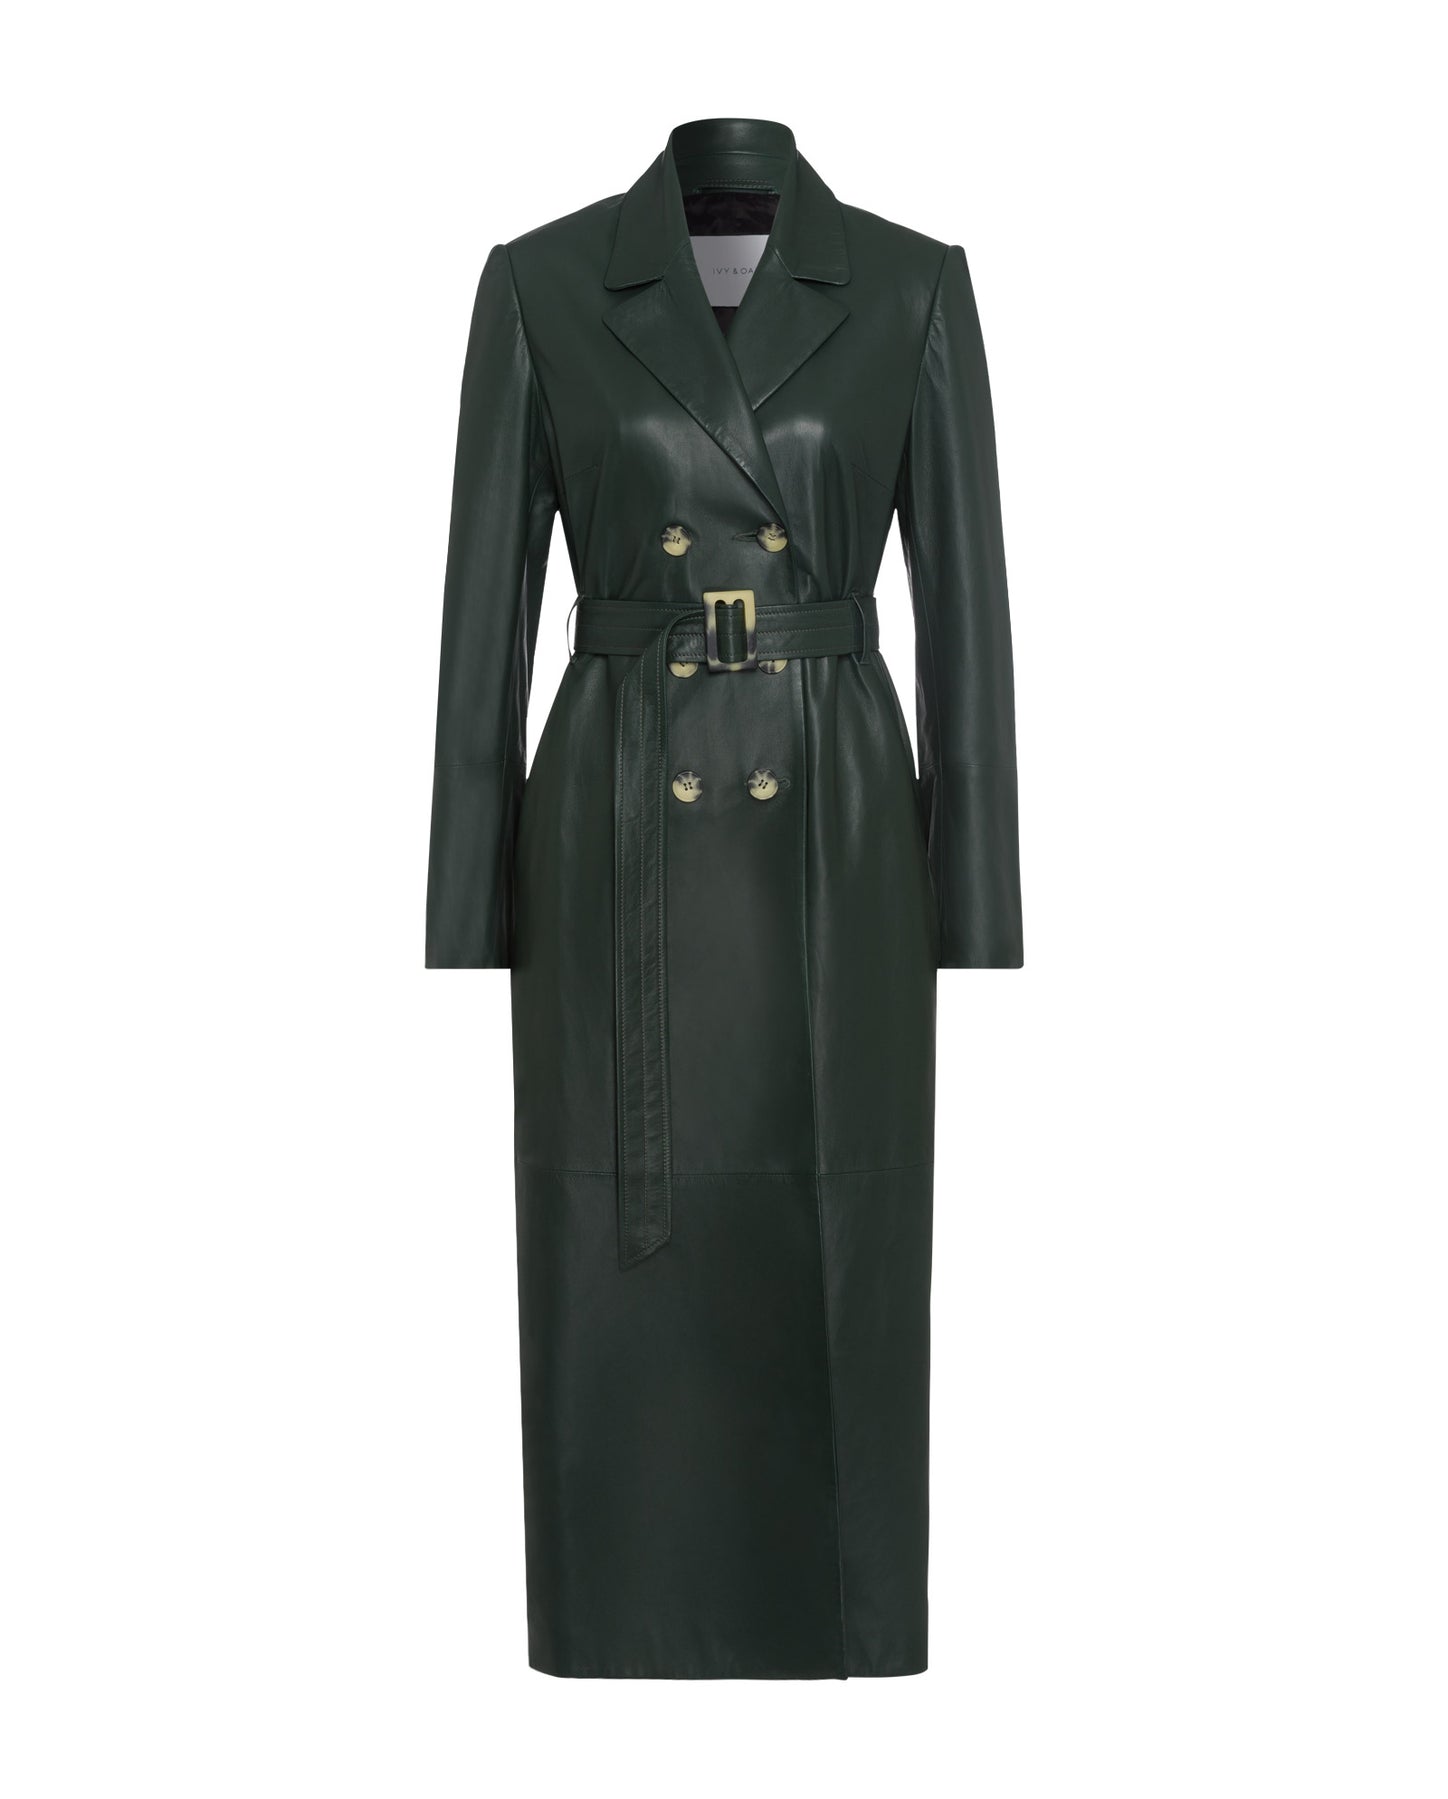 CHROME FREE LEATHER COAT IN MOSS GREEN – BEYOND STUDIOS